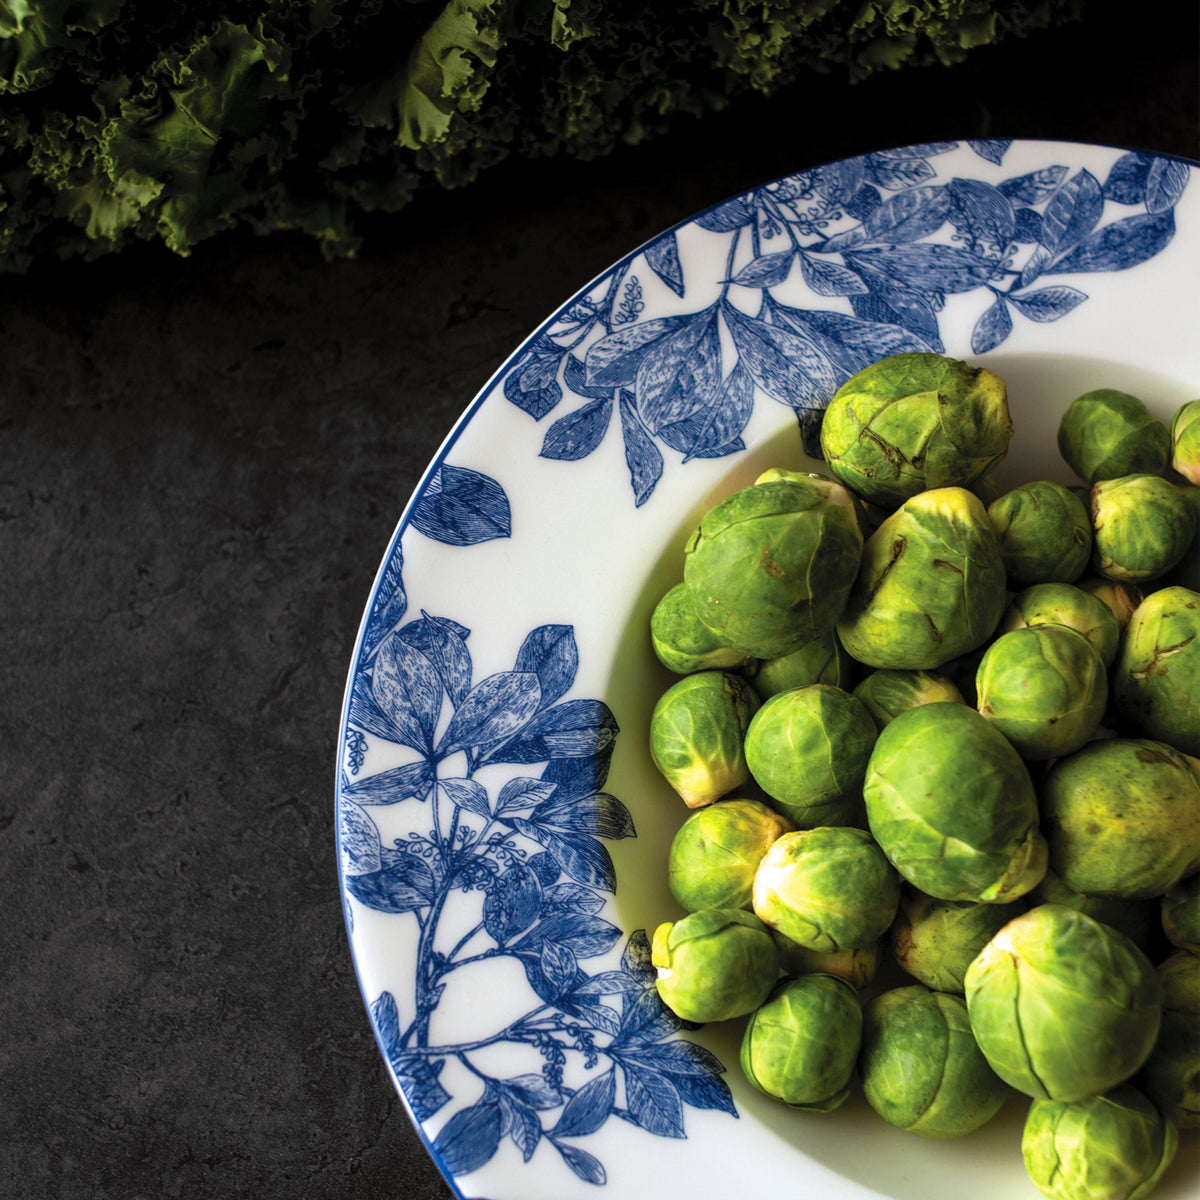 Vintage Blue Arbor Soup Bowl from Caskata Artisanal Home with Brussels sprouts in a porcelain plate.